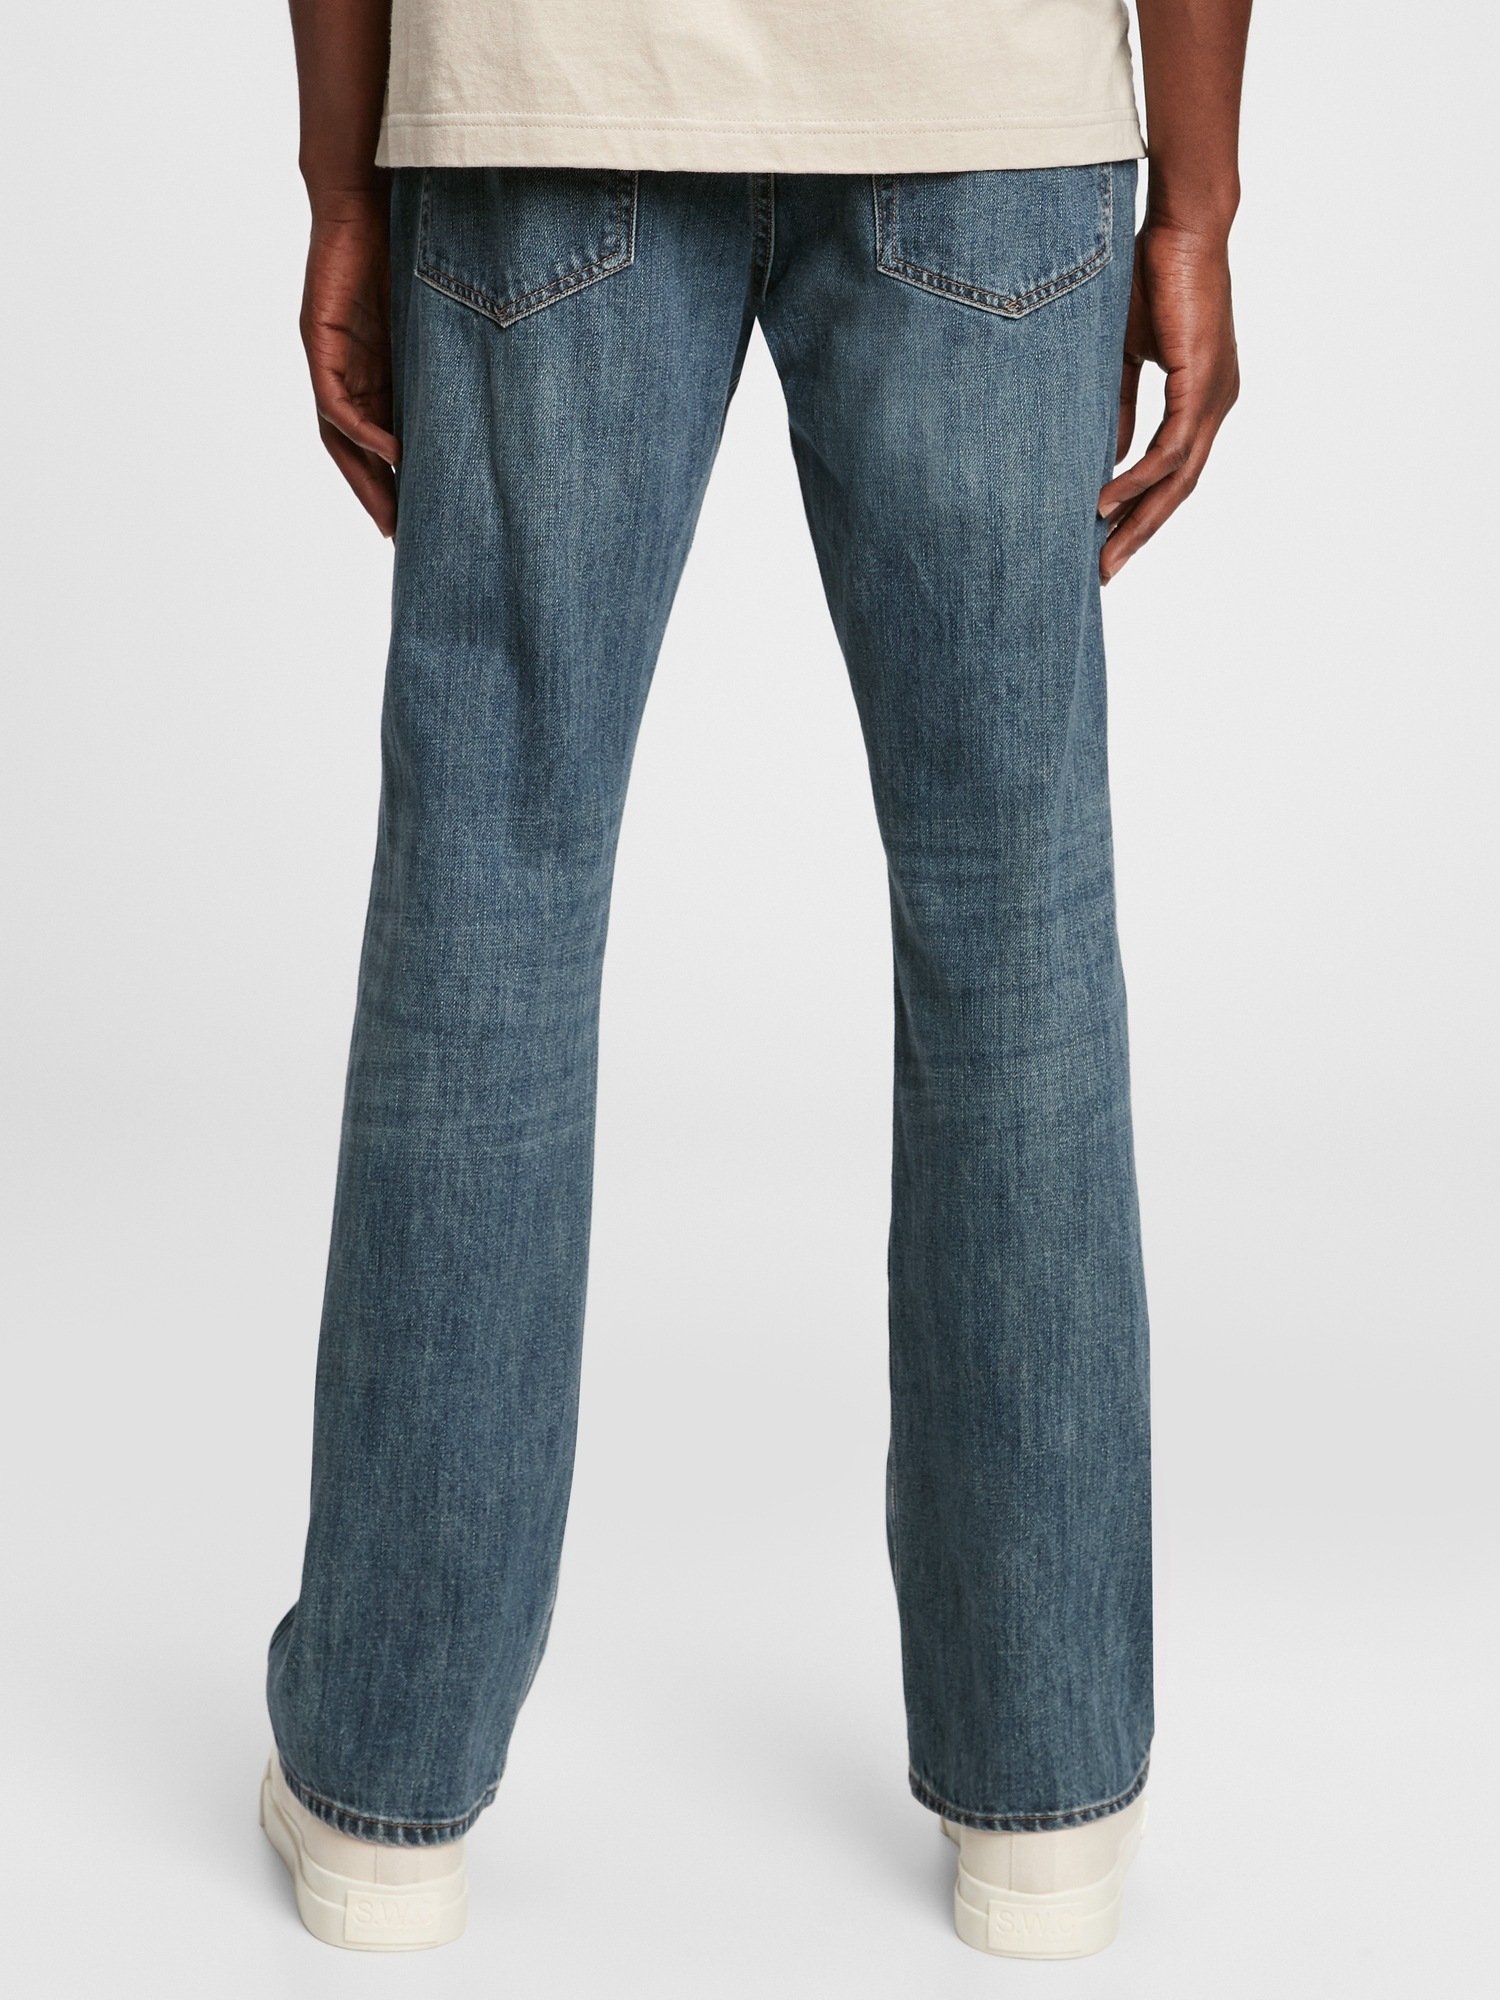 Boot Jeans With Washwell™ | Gap